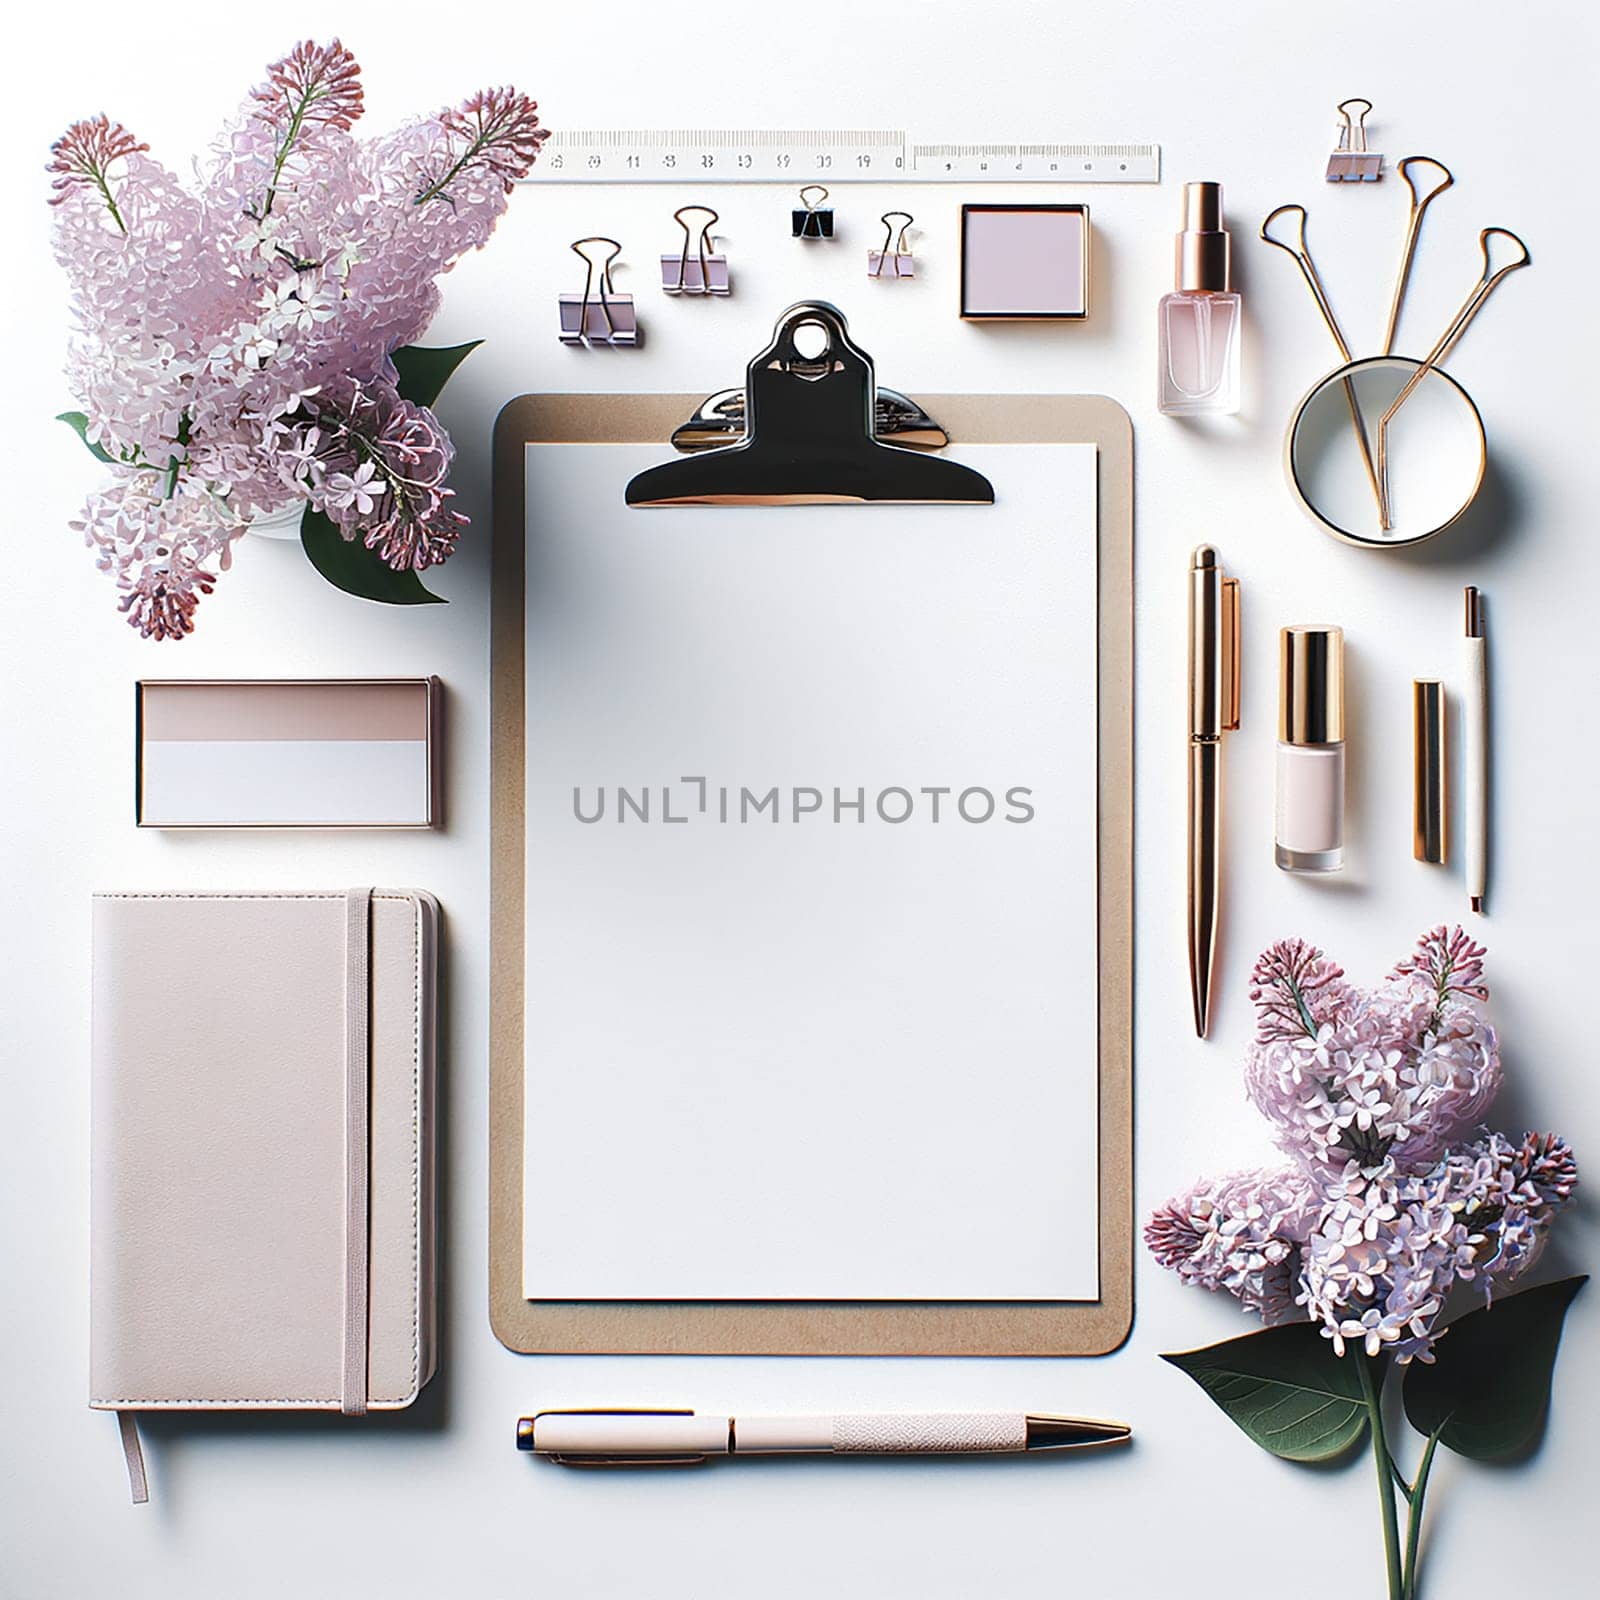 Simplicity Refined: Minimalistic Workspace Beauty Blog by Petrichor